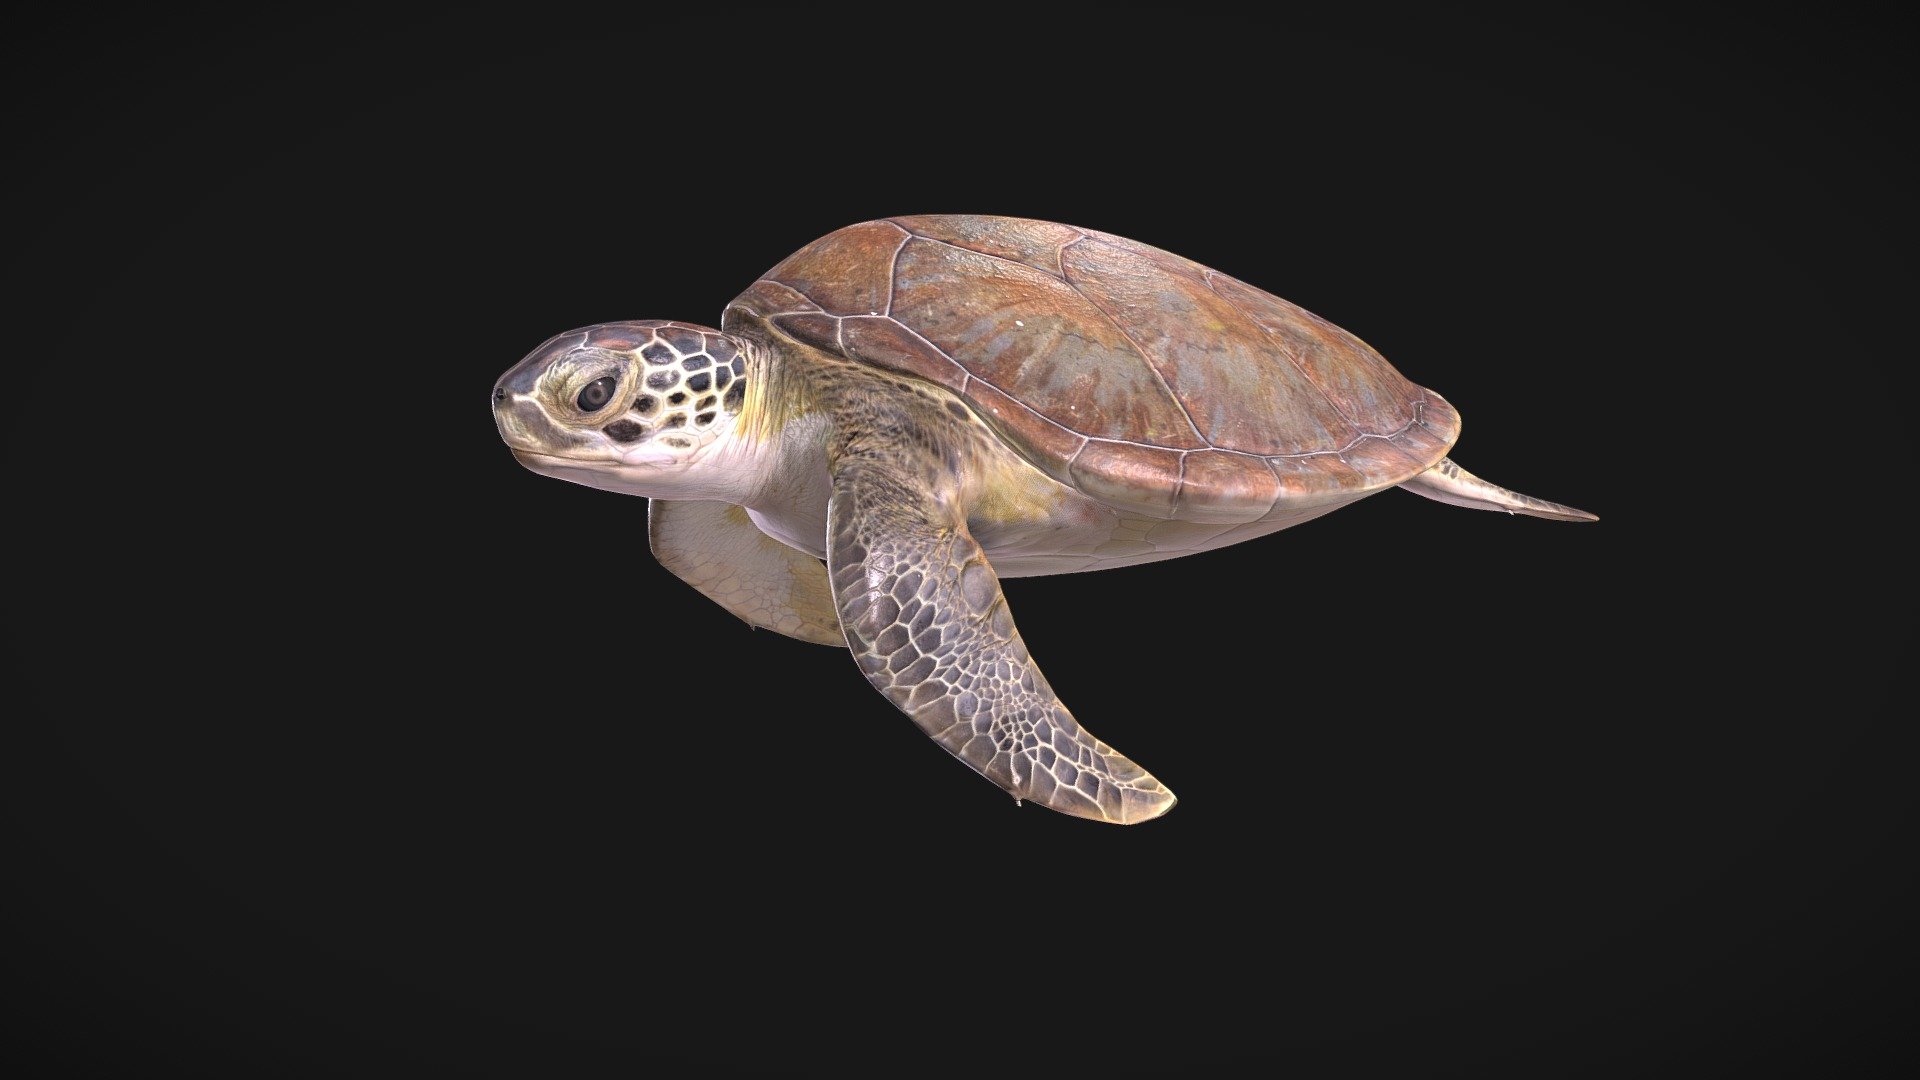 This is an animation of a juvenile (straight minimum carapace length = 27.5 cm, mass = 3.0 kg) green sea turtle (Chelonia mydas) that was reconstructed from photos and measurements from a live individual. The turtle was collected by Inwater Research Group during an in-water assessment to gain valuable insights into the demographics of this threatened species.  The turtle was in good health and released back into the wild.  A CG artist (Johnson Martin) reconstructed the turtle using Blender software.

Downloads are freely available for creative and non-profit use. To inquire about licensing, please visit www.digitallife3d.org 3d model